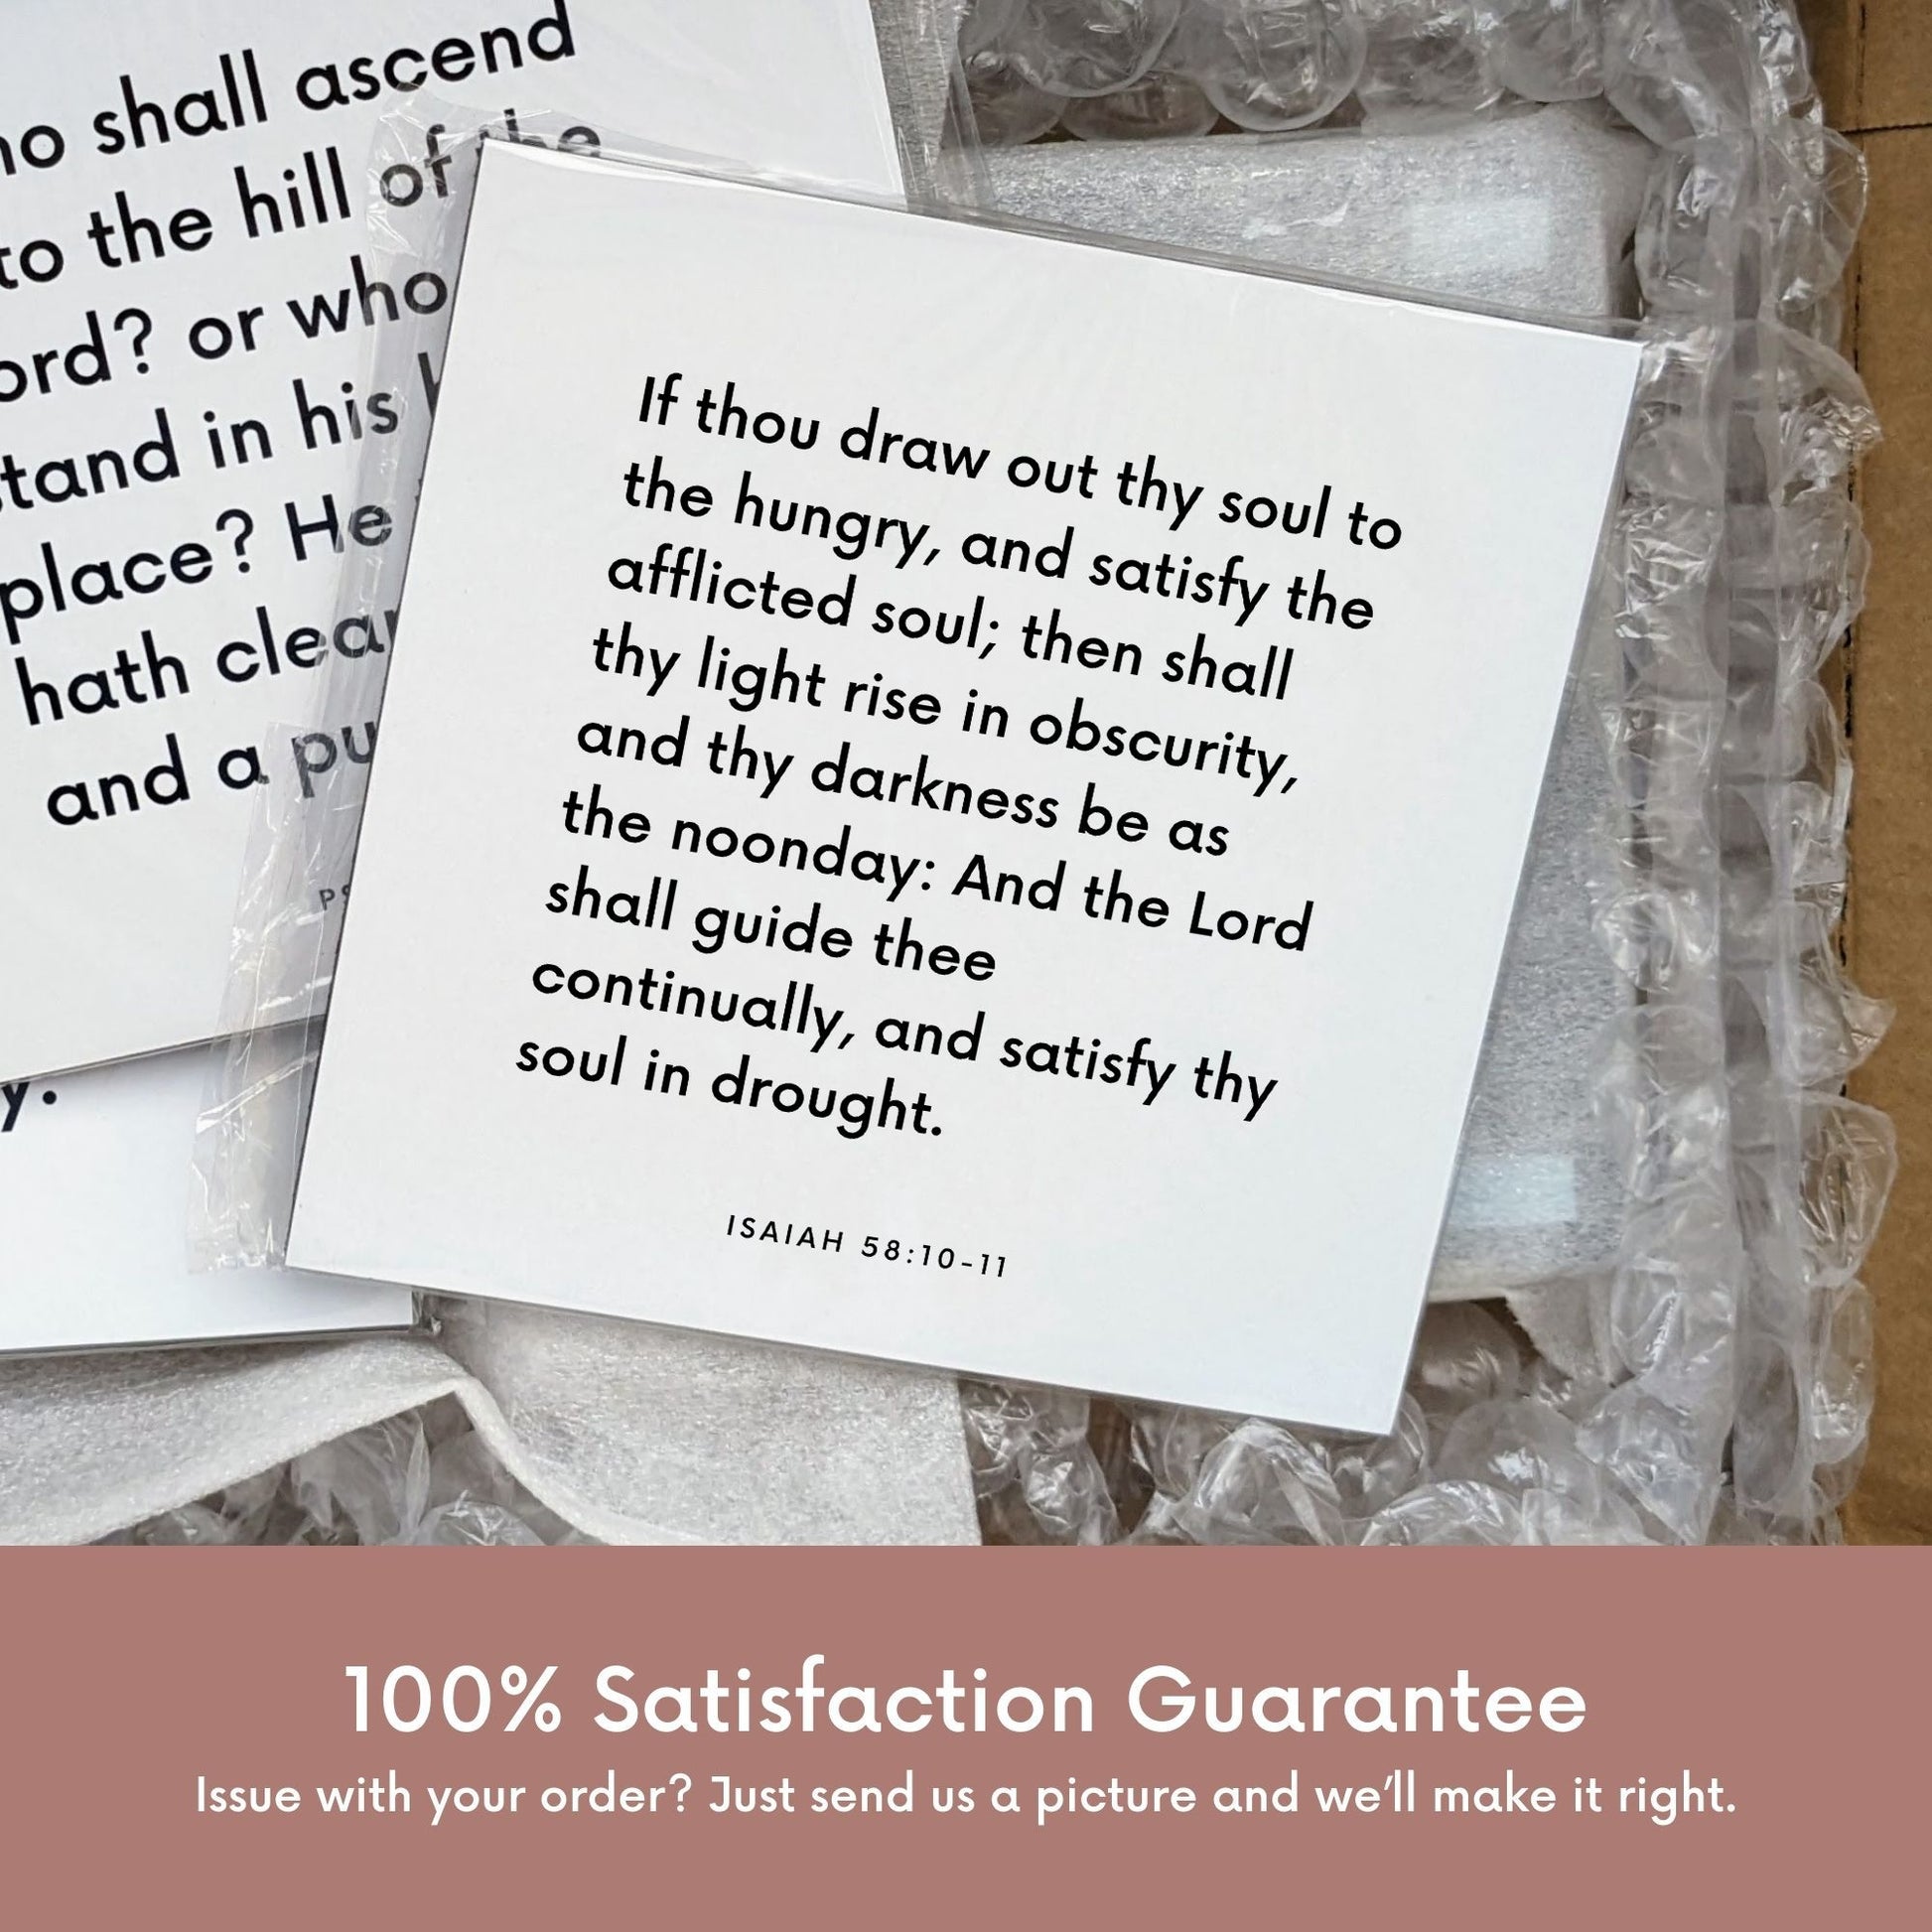 Shipping materials for scripture tile of Isaiah 58:10-11 - "If thou draw out thy soul to the hungry"